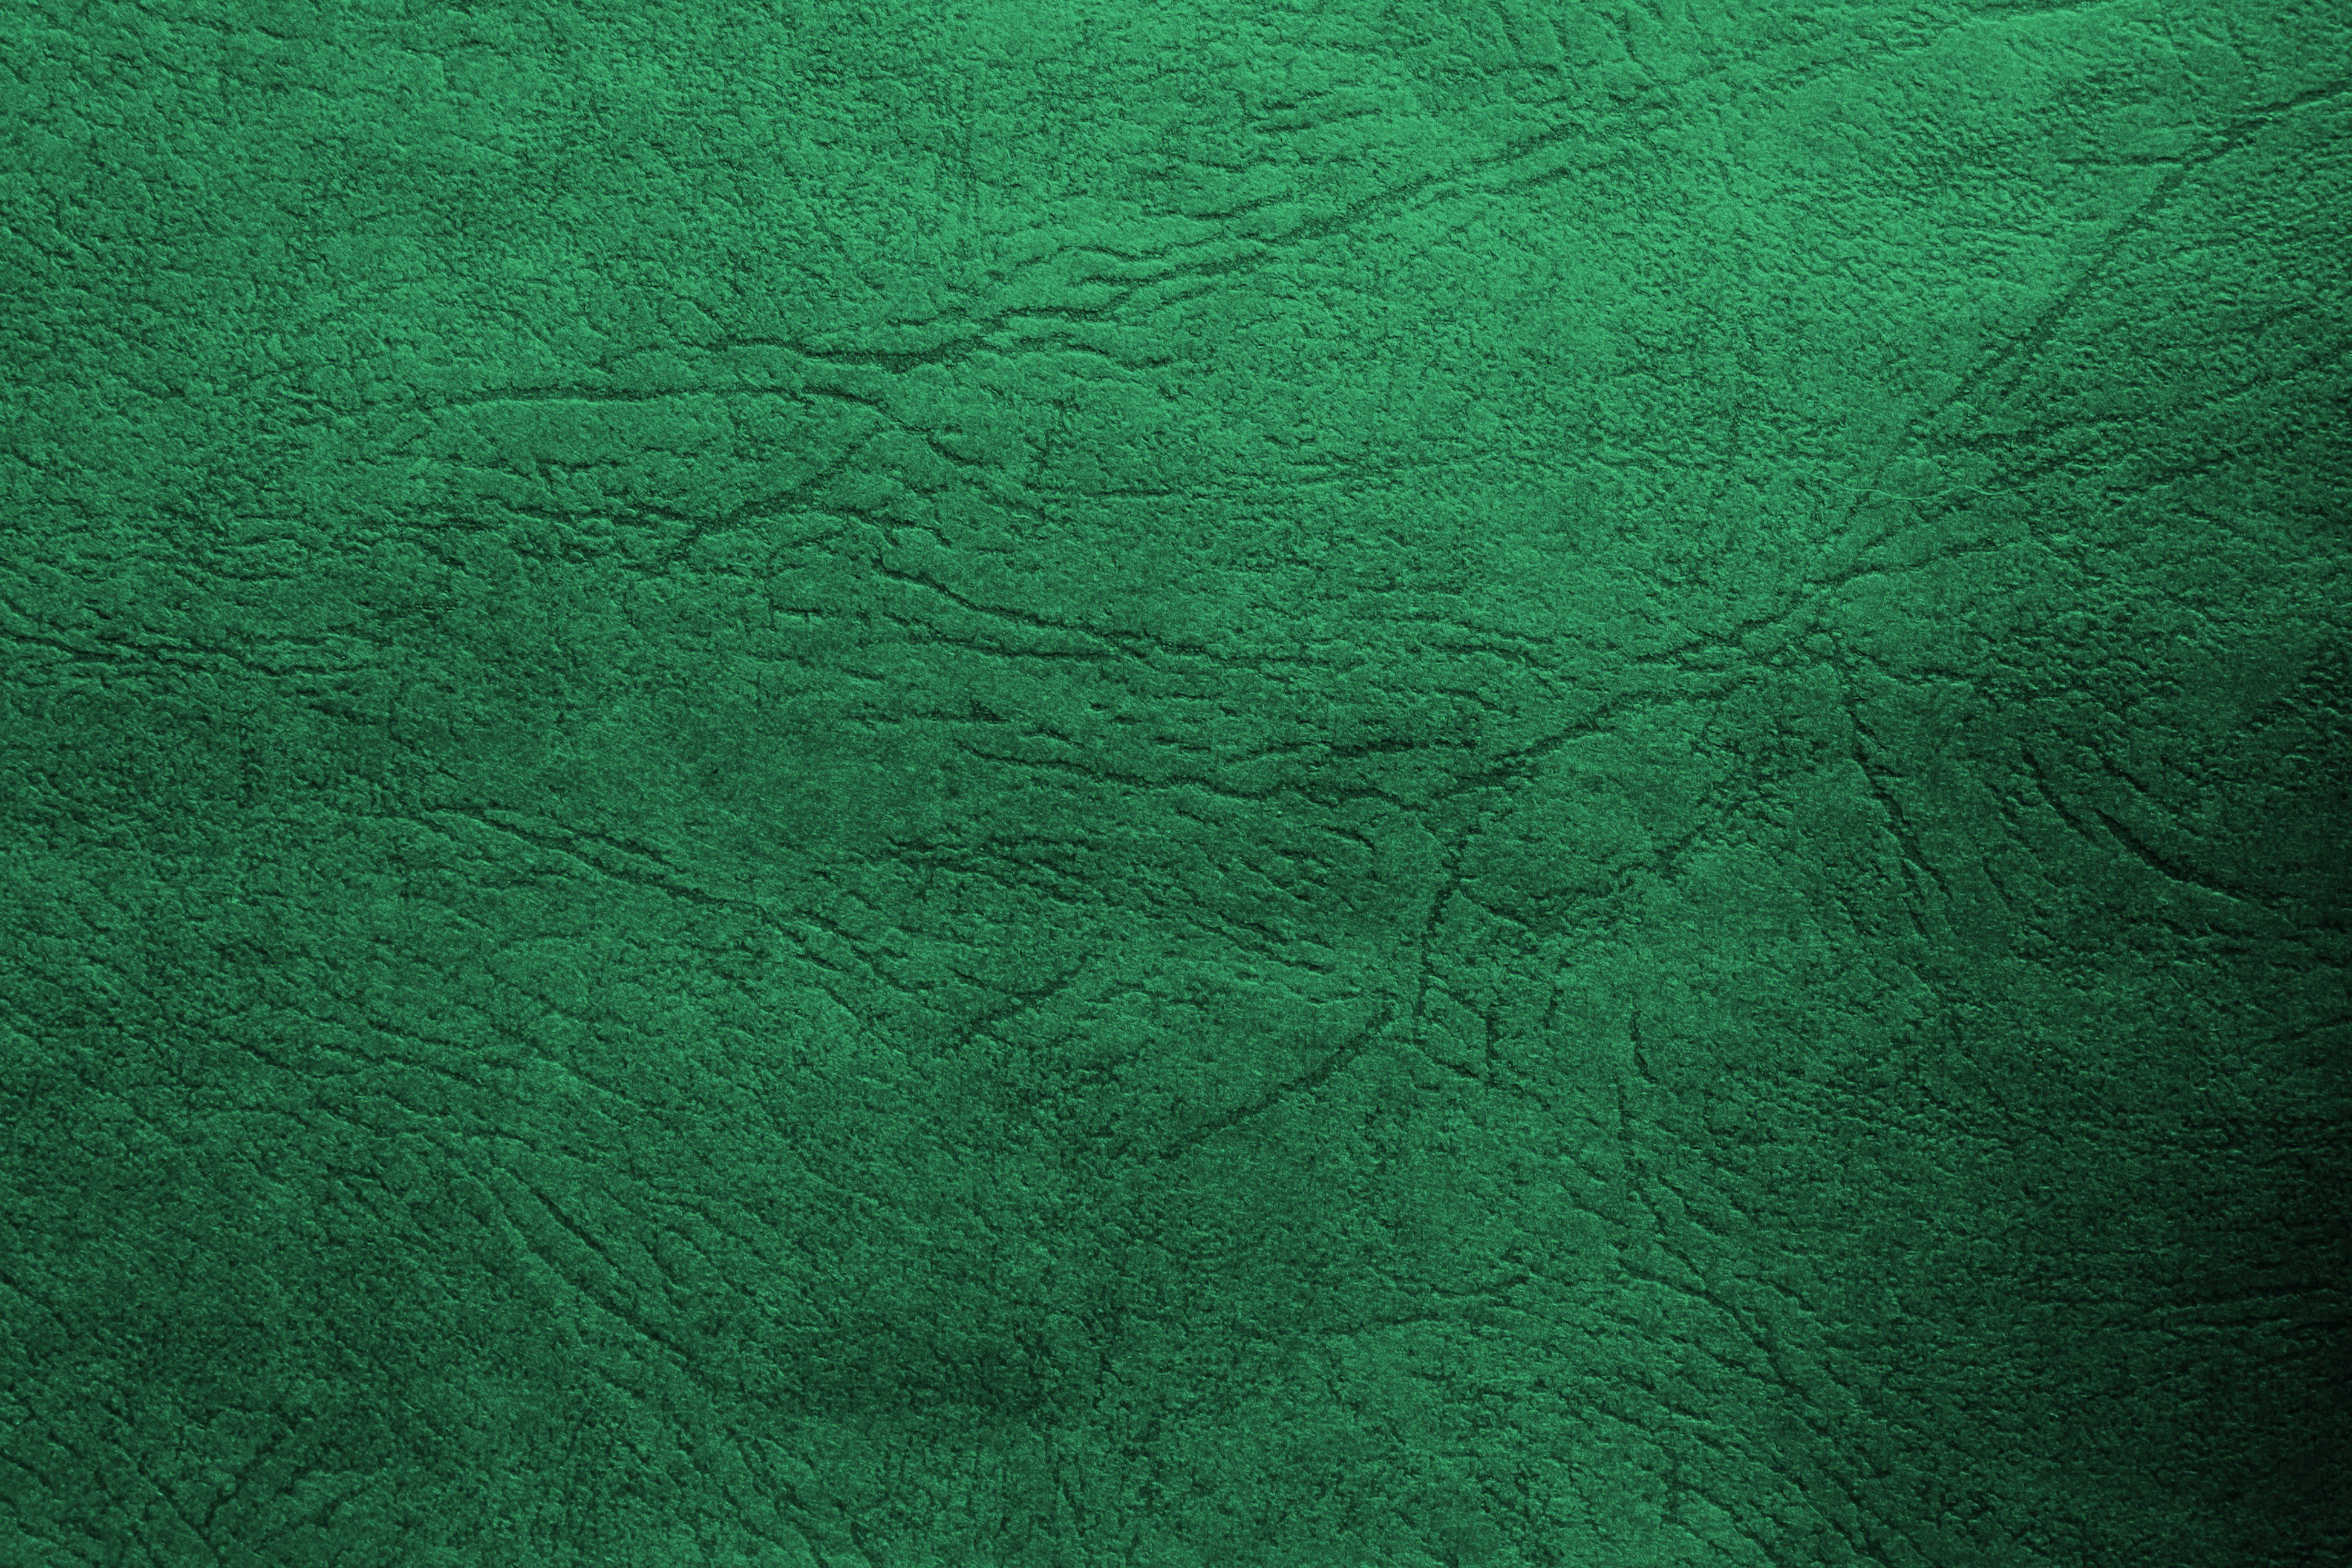 Green Leather Texture Picture | Free Photograph | Photos Public Domain